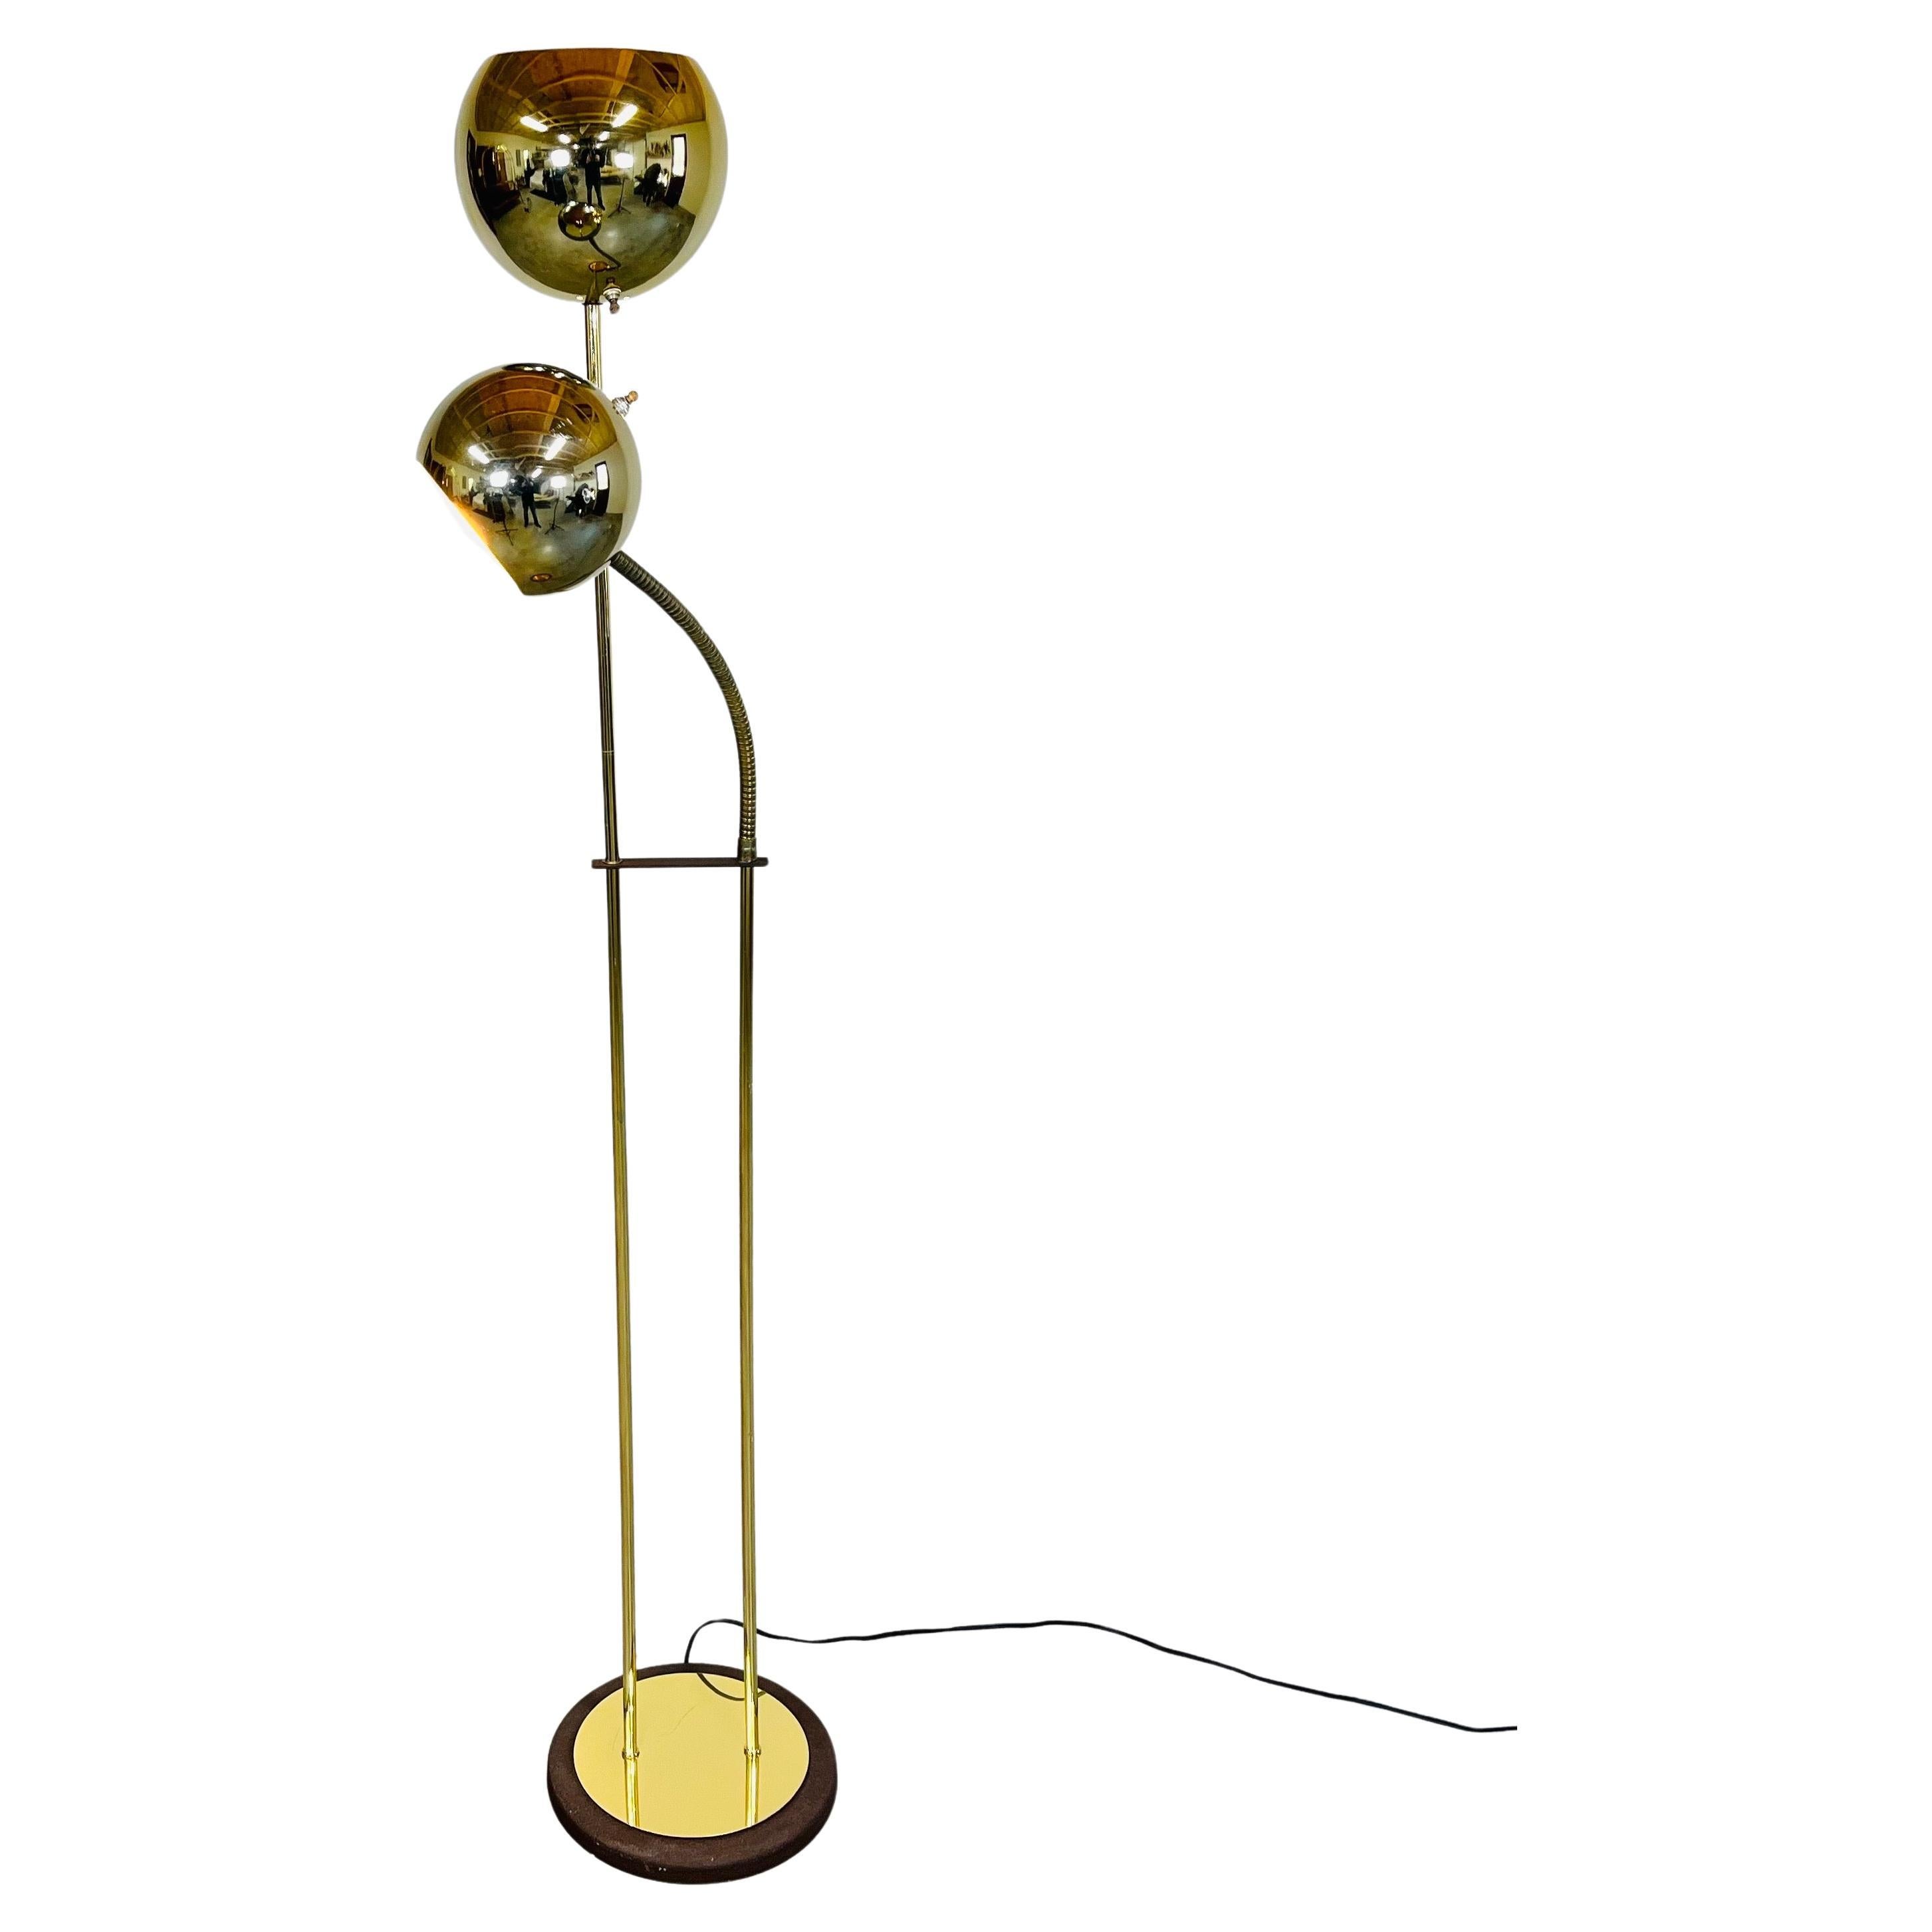 Mid-century double orb brass floor lamp having an adjustable reading light in the manner of Robert Sonneman. United States circa 1960. 
In great vintage condition having minor signs of usage. Each light features its own on/off switch. 
61x20x12” HWD